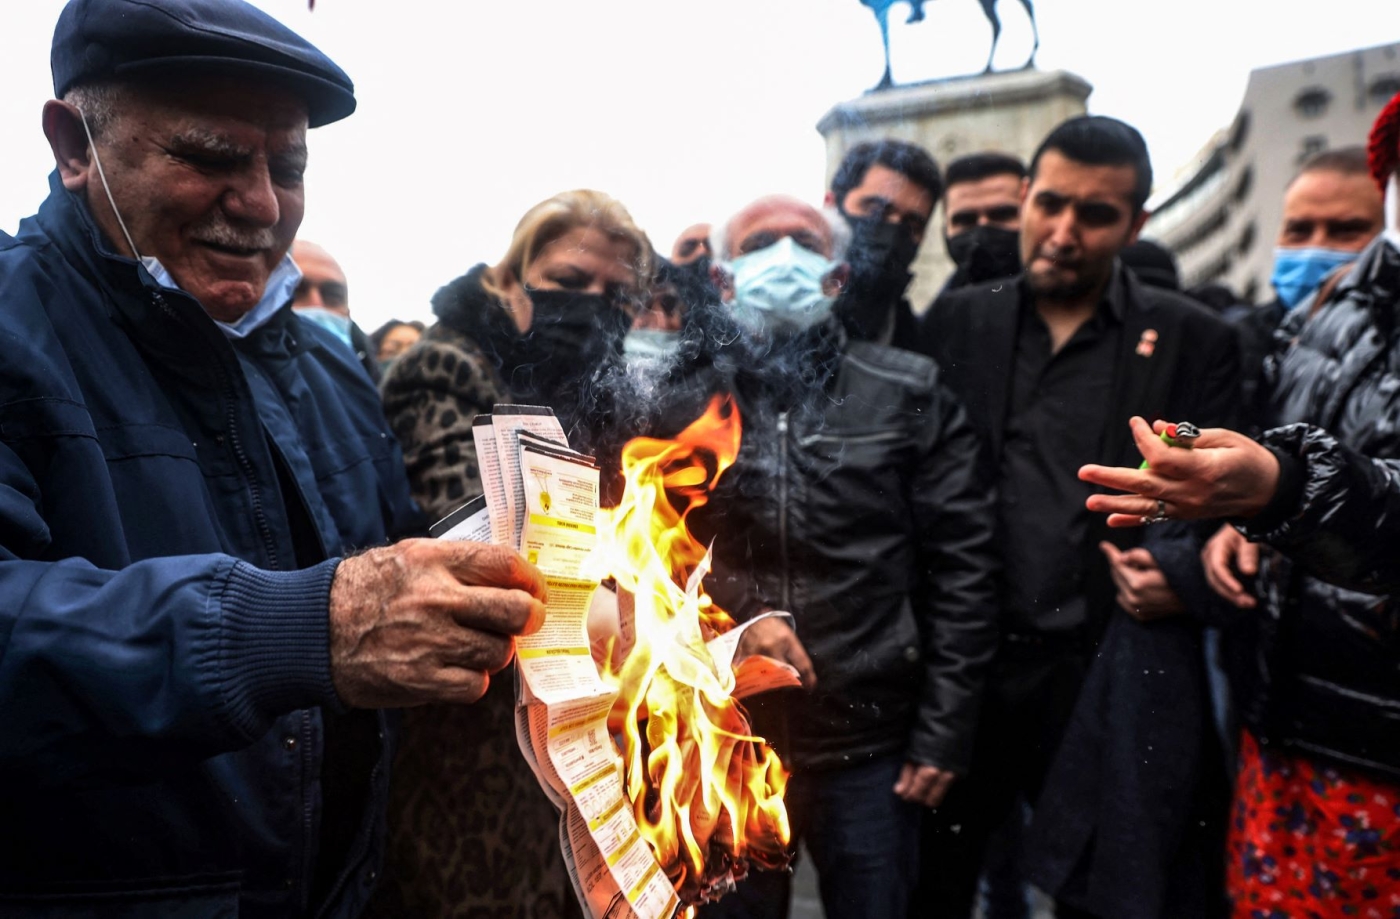 People burn their electricity bills as a protest against high energy prices in on February 9, 2022 (AFP)